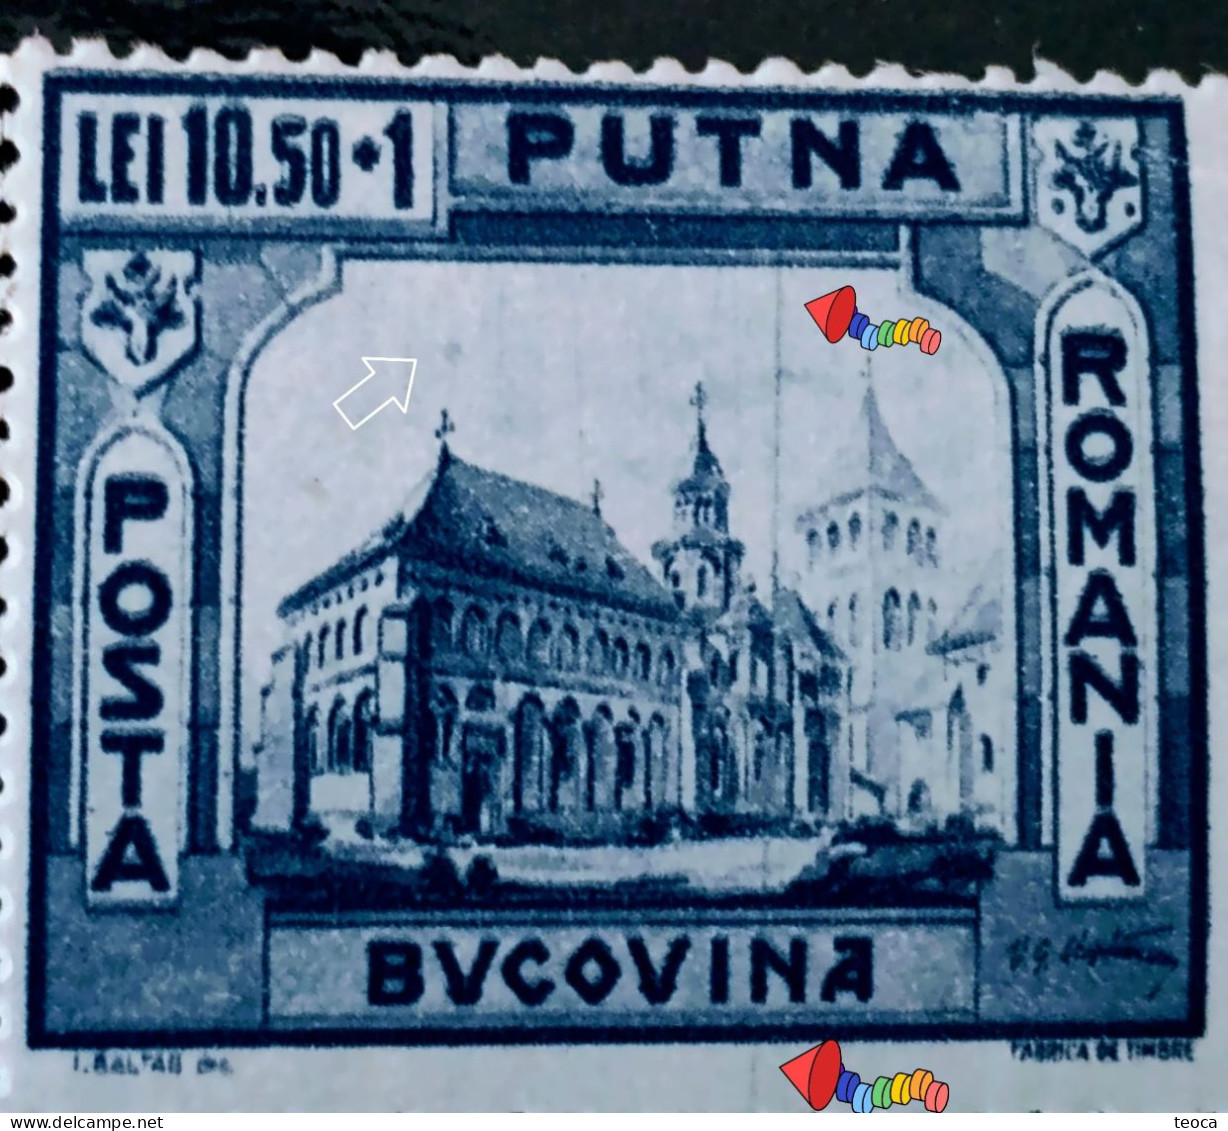 Stamps Errors Romania 1941,Mi 740 Printed With Full Color Circle And Vertical Line On, Bucovina, Putna Monastery,Unused - Errors, Freaks & Oddities (EFO)